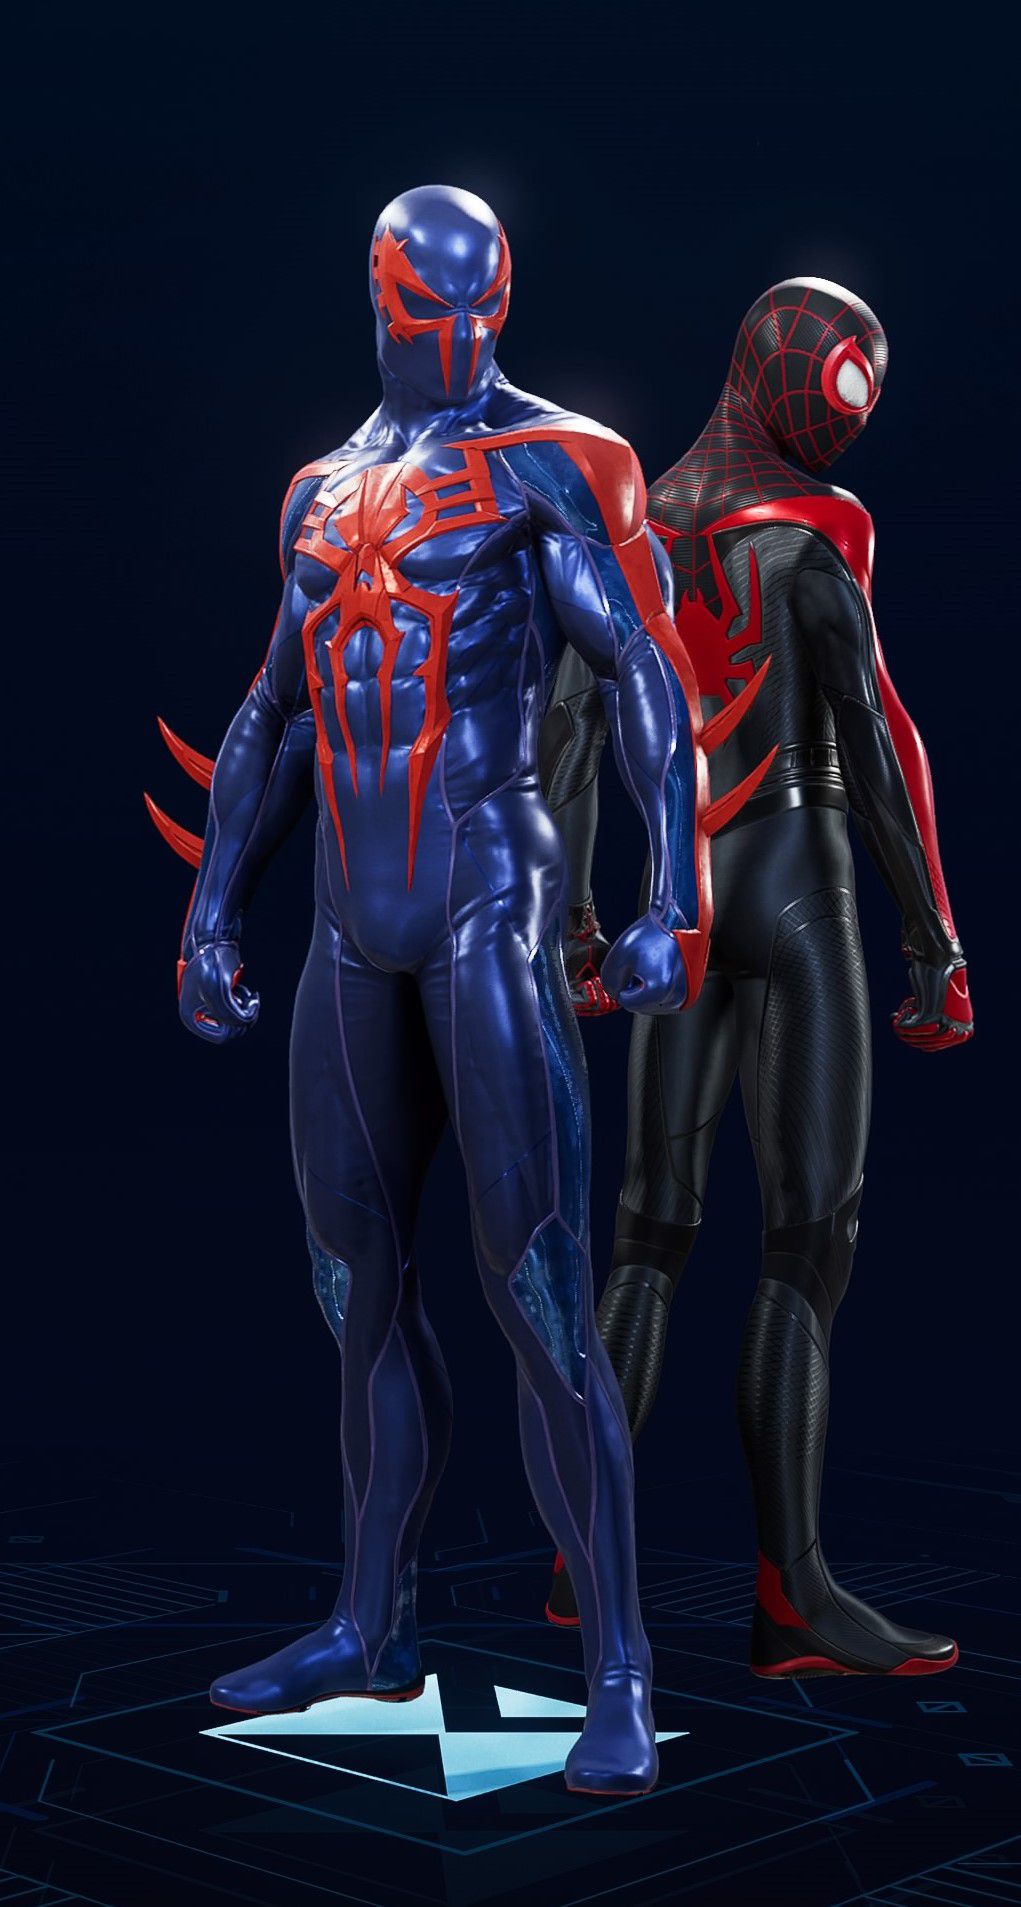 Peter Parker stands in his Spider-Man 2099 Black Suit in the suit selection screen of Spider-Man 2.